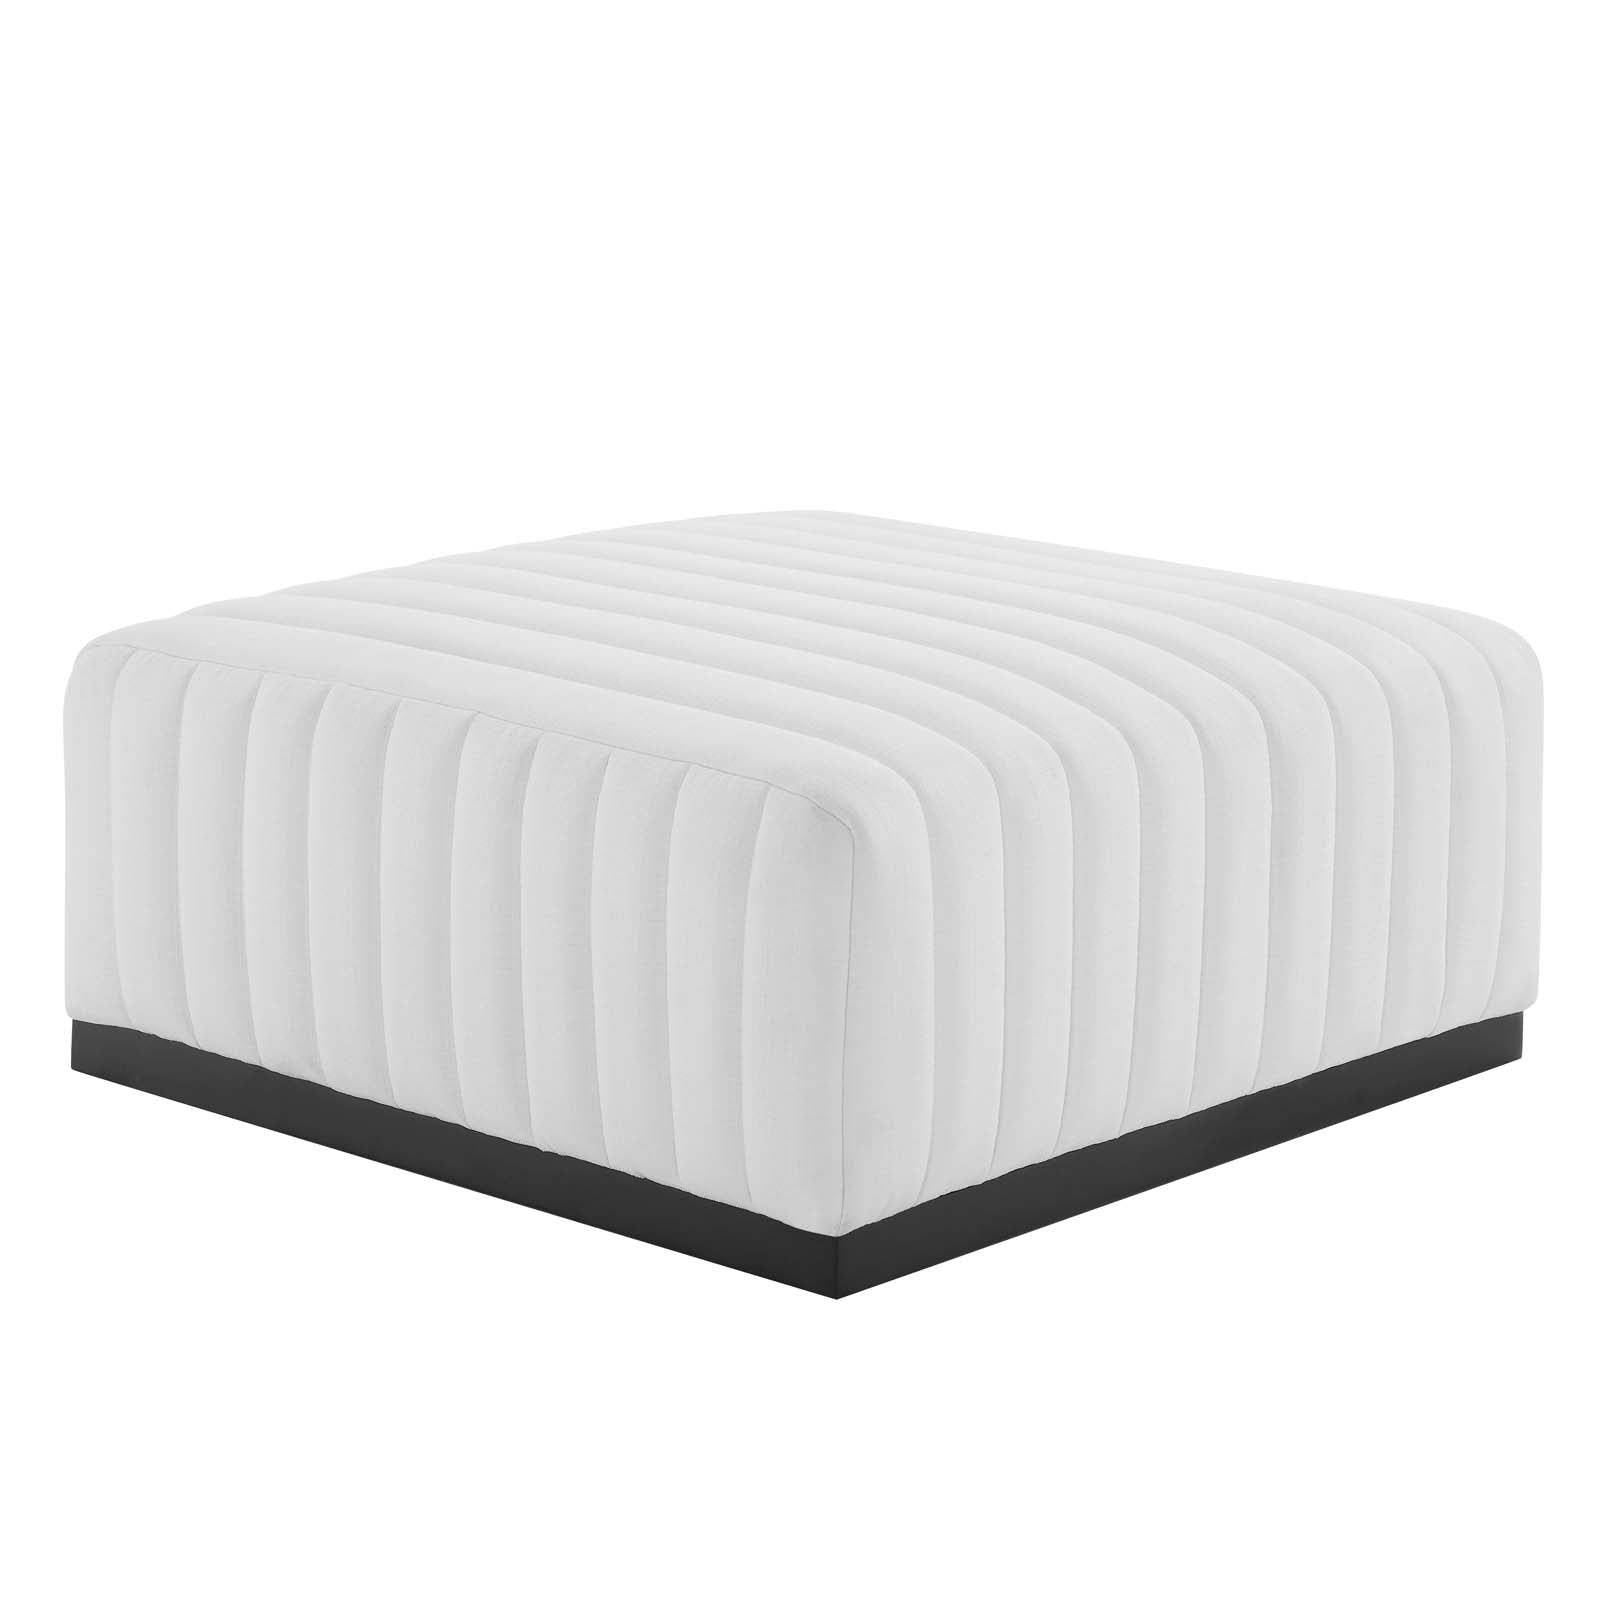 Modway Ottomans & Stools - Conjure Channel Tufted Upholstered Fabric Ottoman Black White